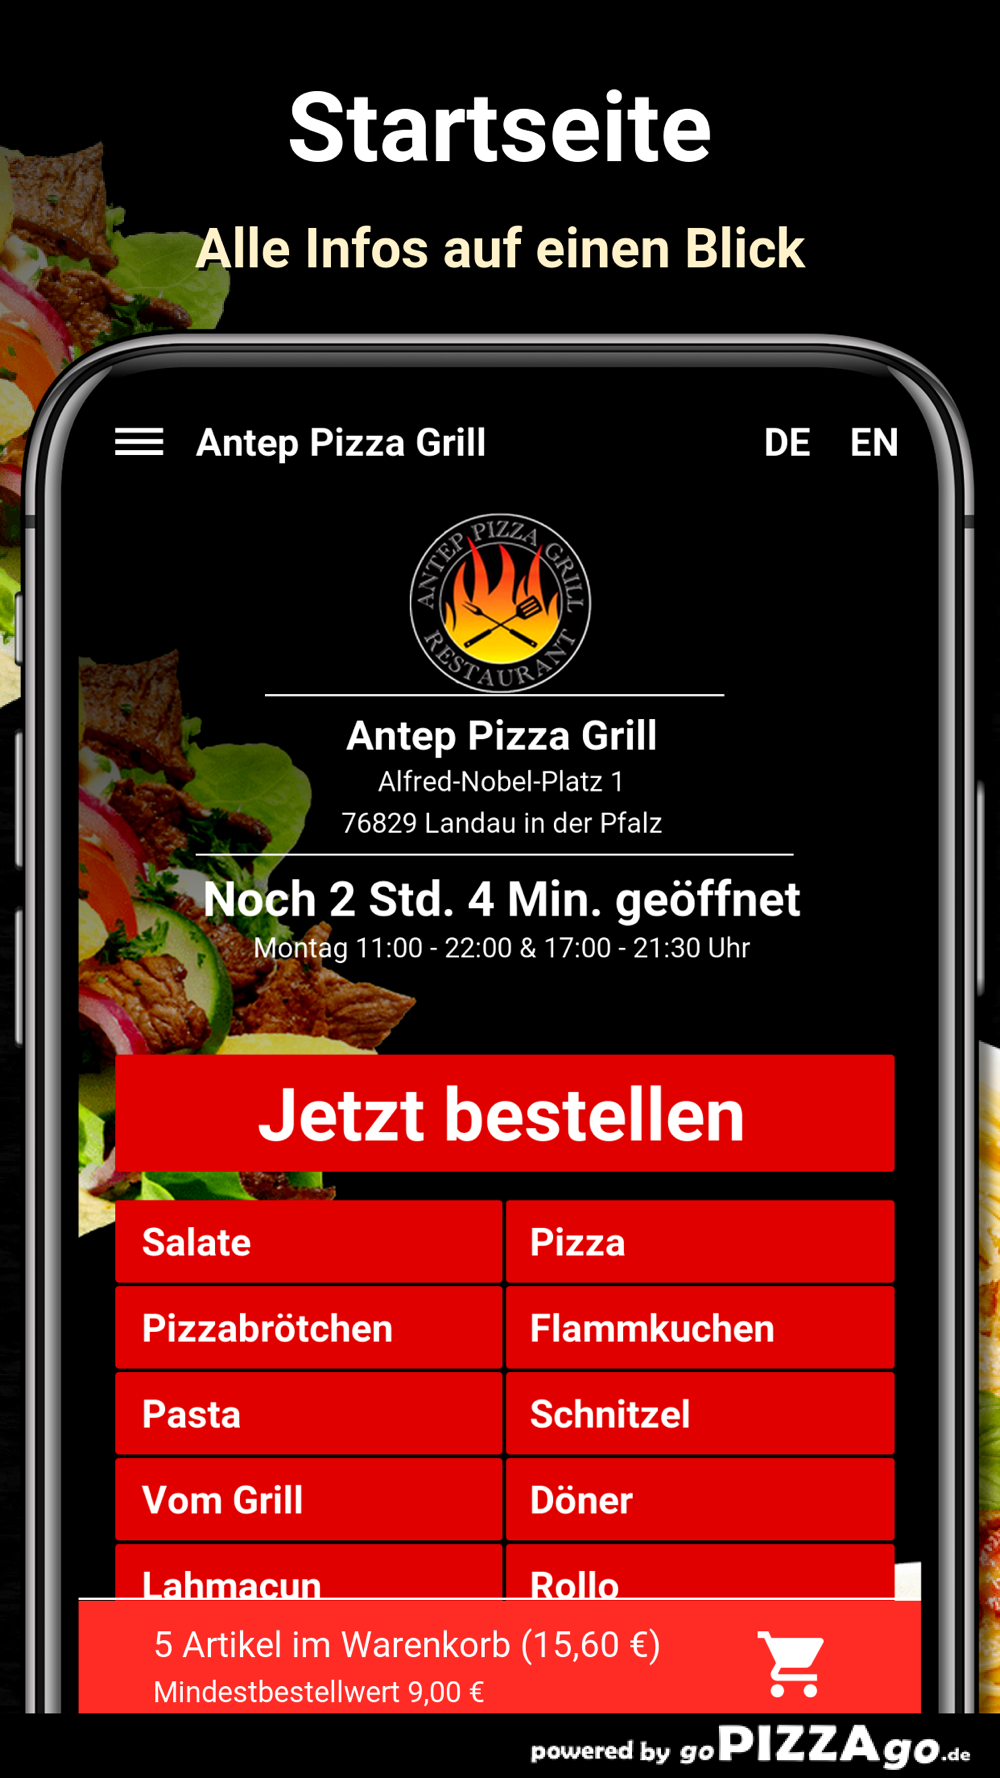 Antep Pizza Grill Landau Free Download App for iPhone - STEPrimo.com